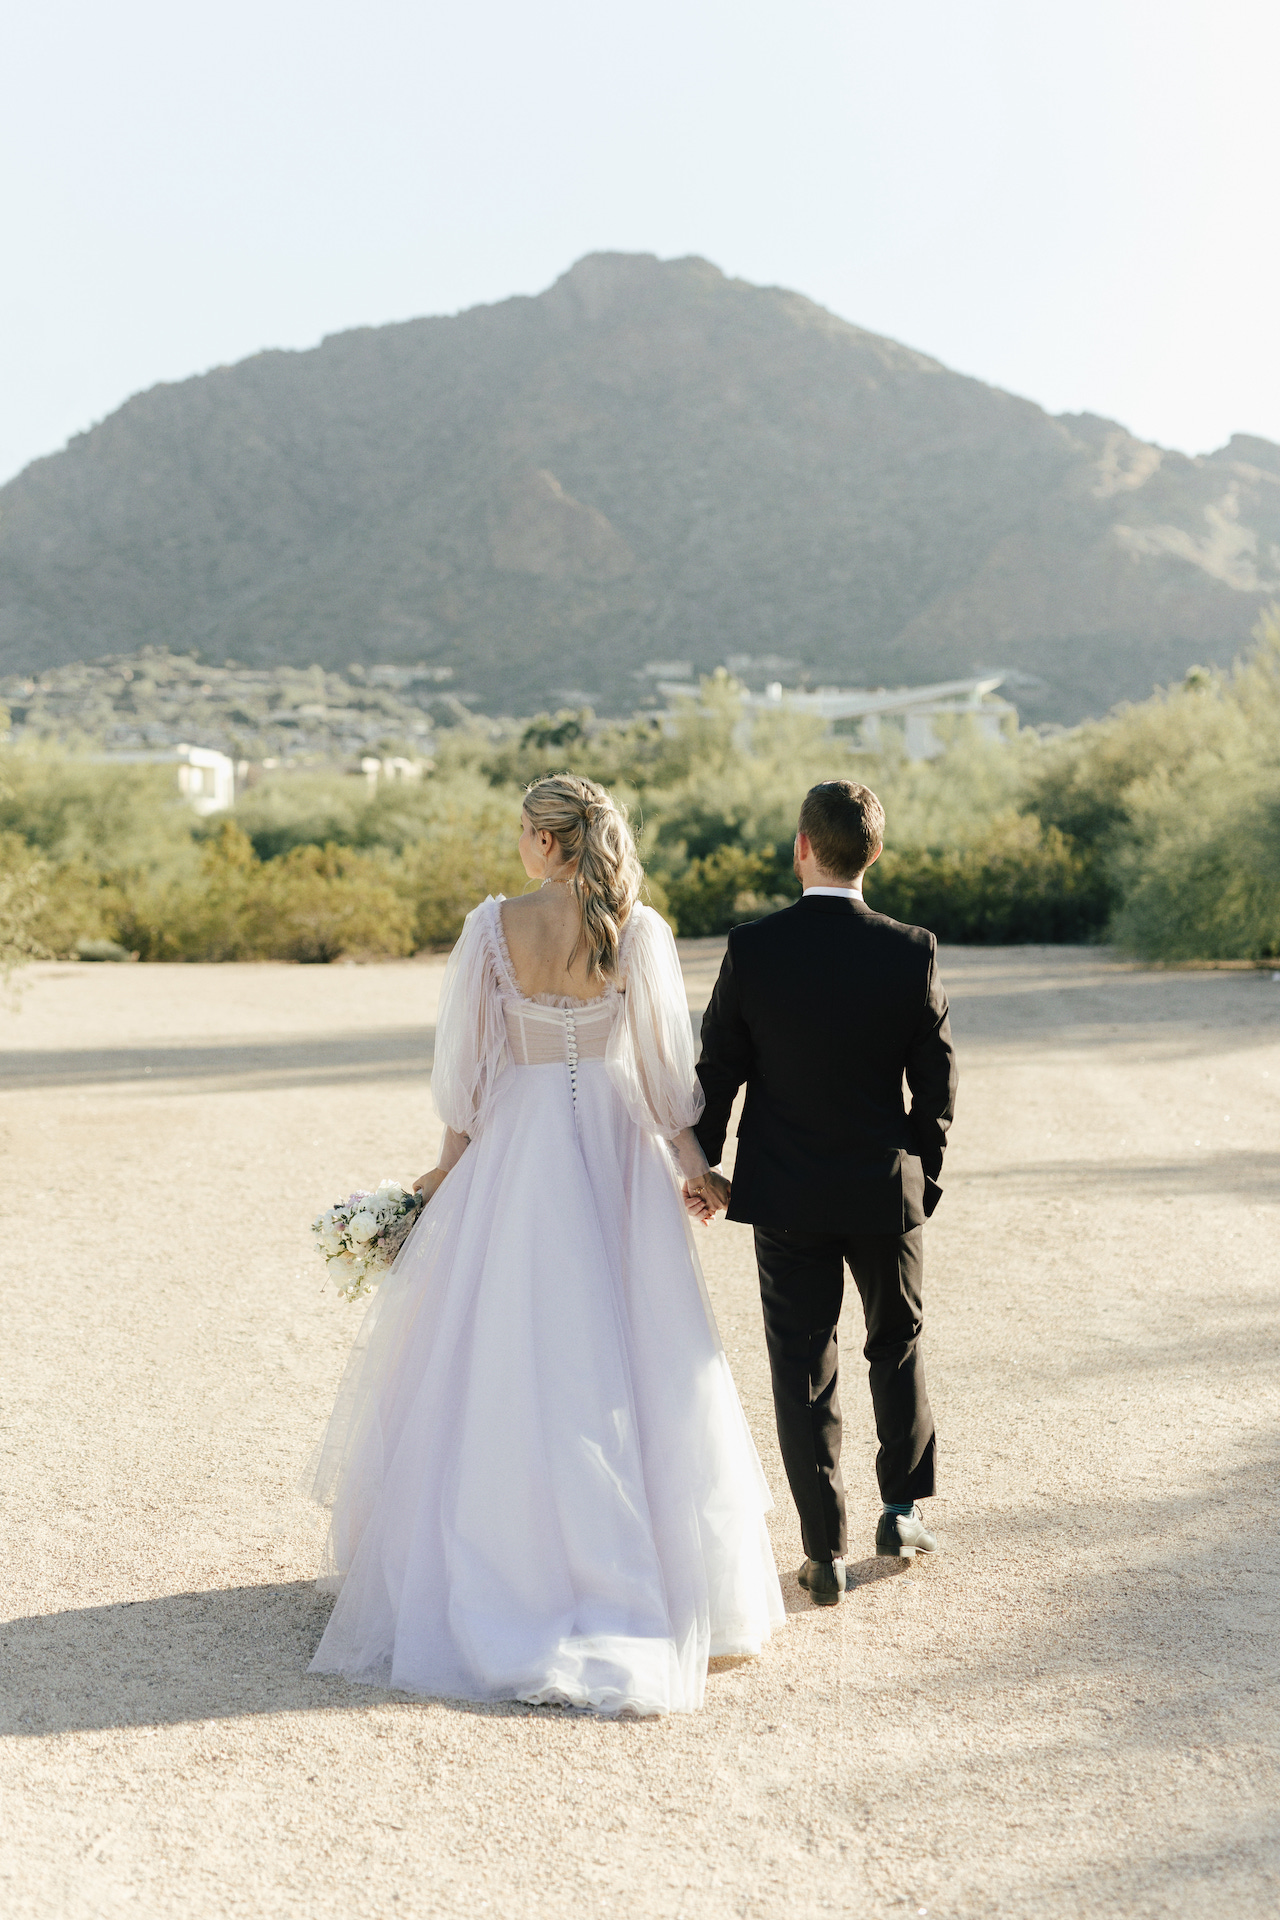 Bride and groom walking holding hands in open area with desert landscape around them,